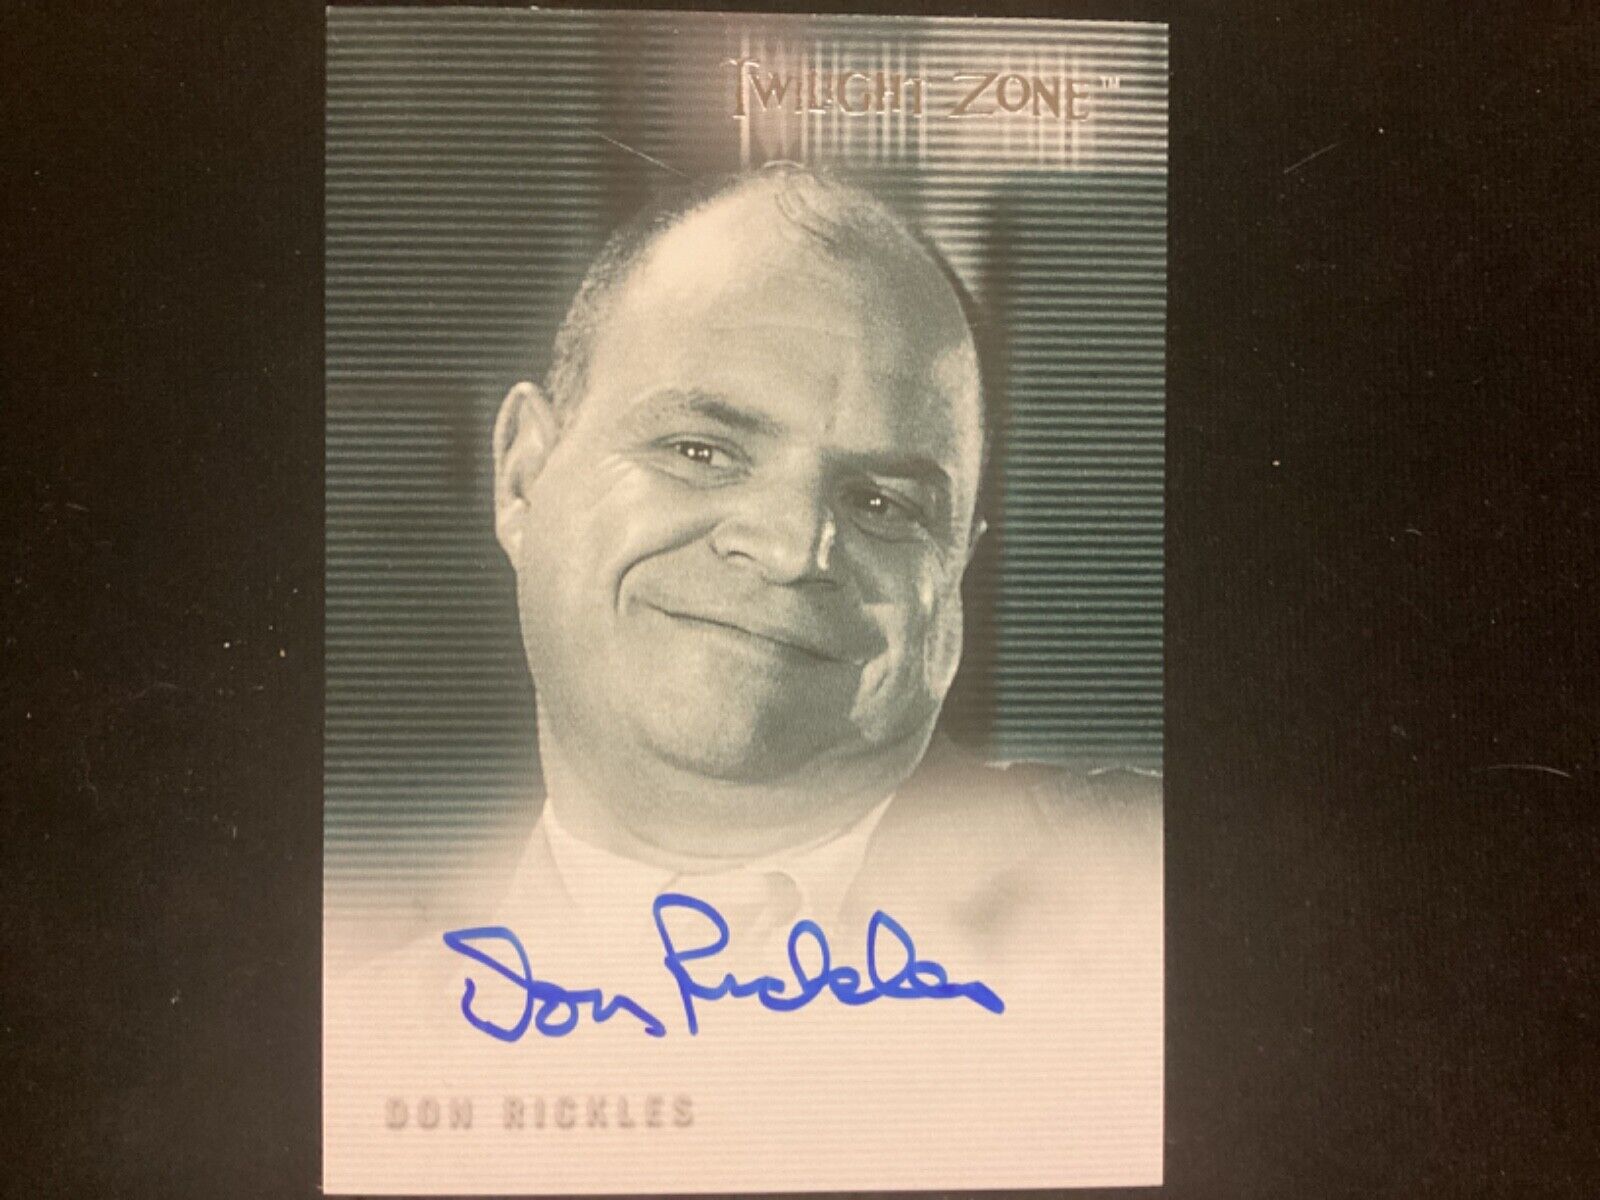 TWILIGHT ZONE A-25 DON RICKLES AUTOGRAPHED CARD